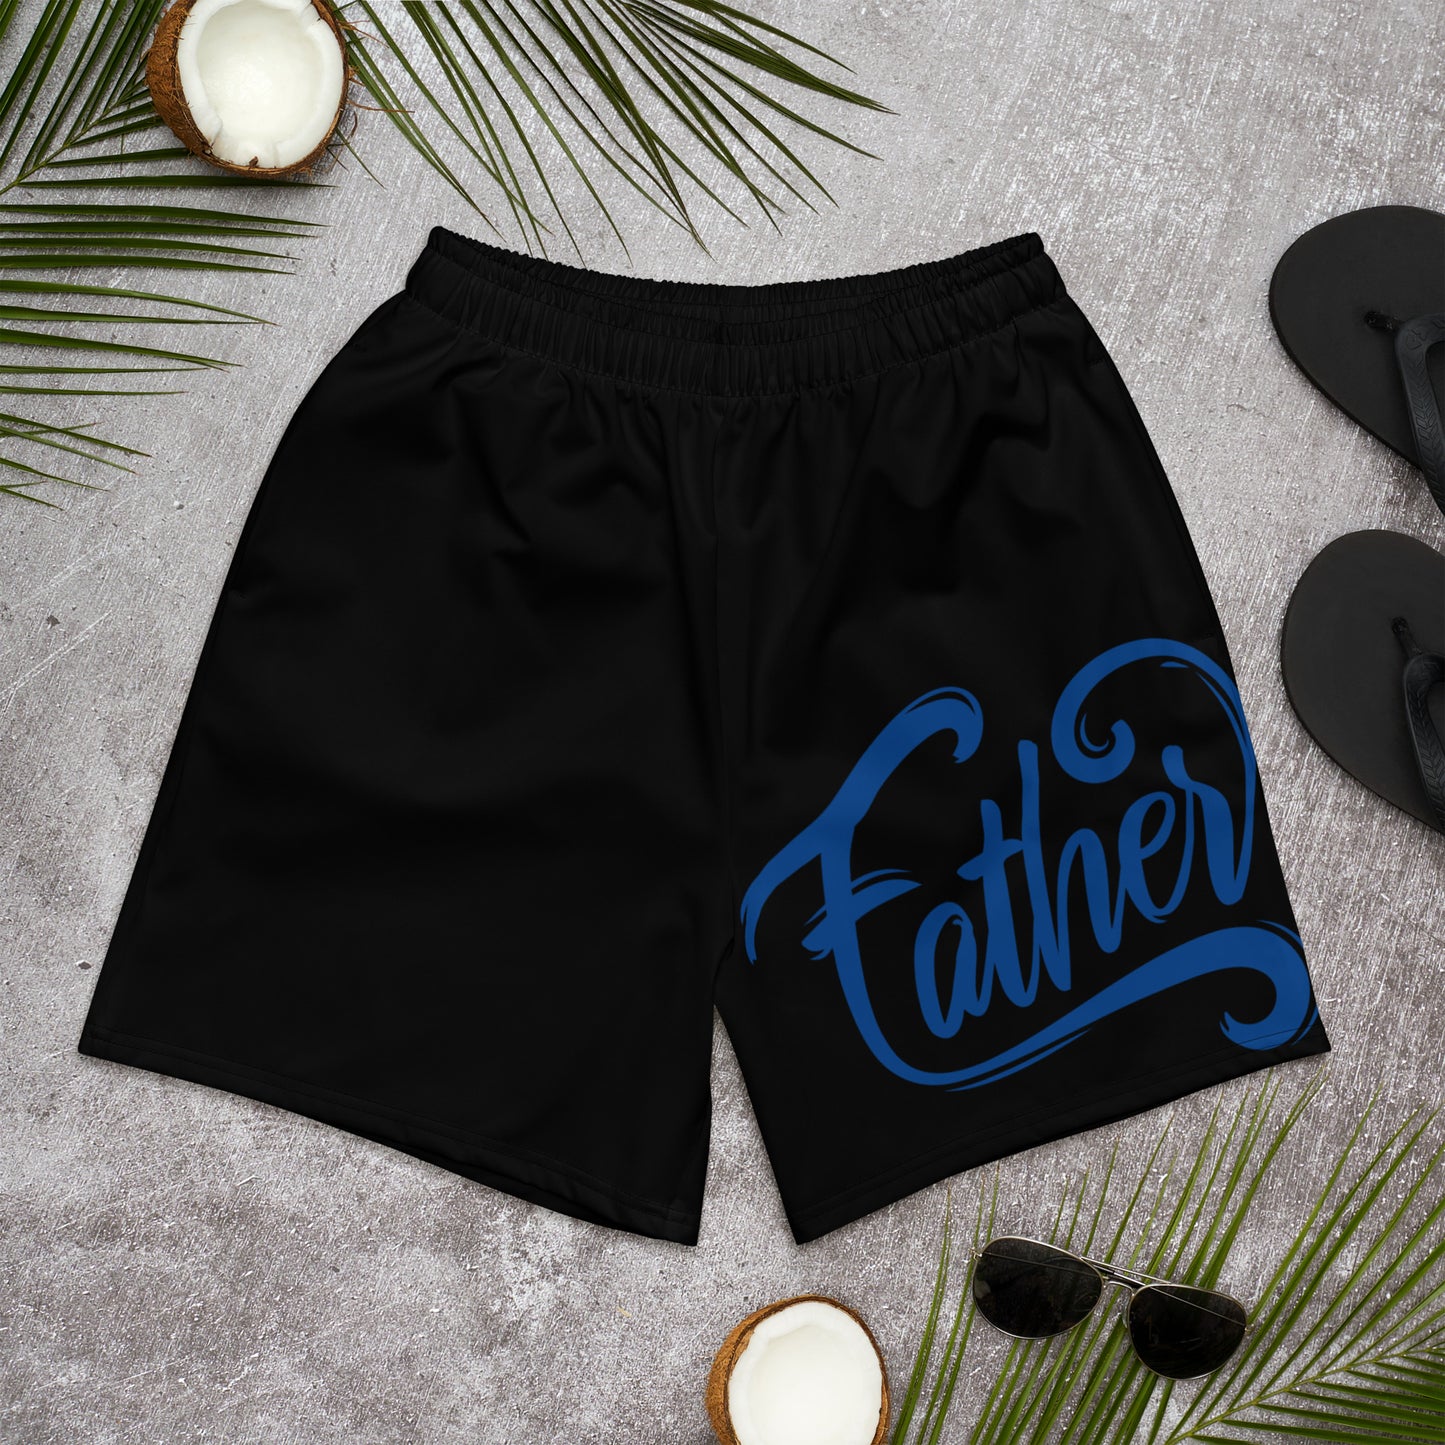 "Father" men's sports shorts (ecological)